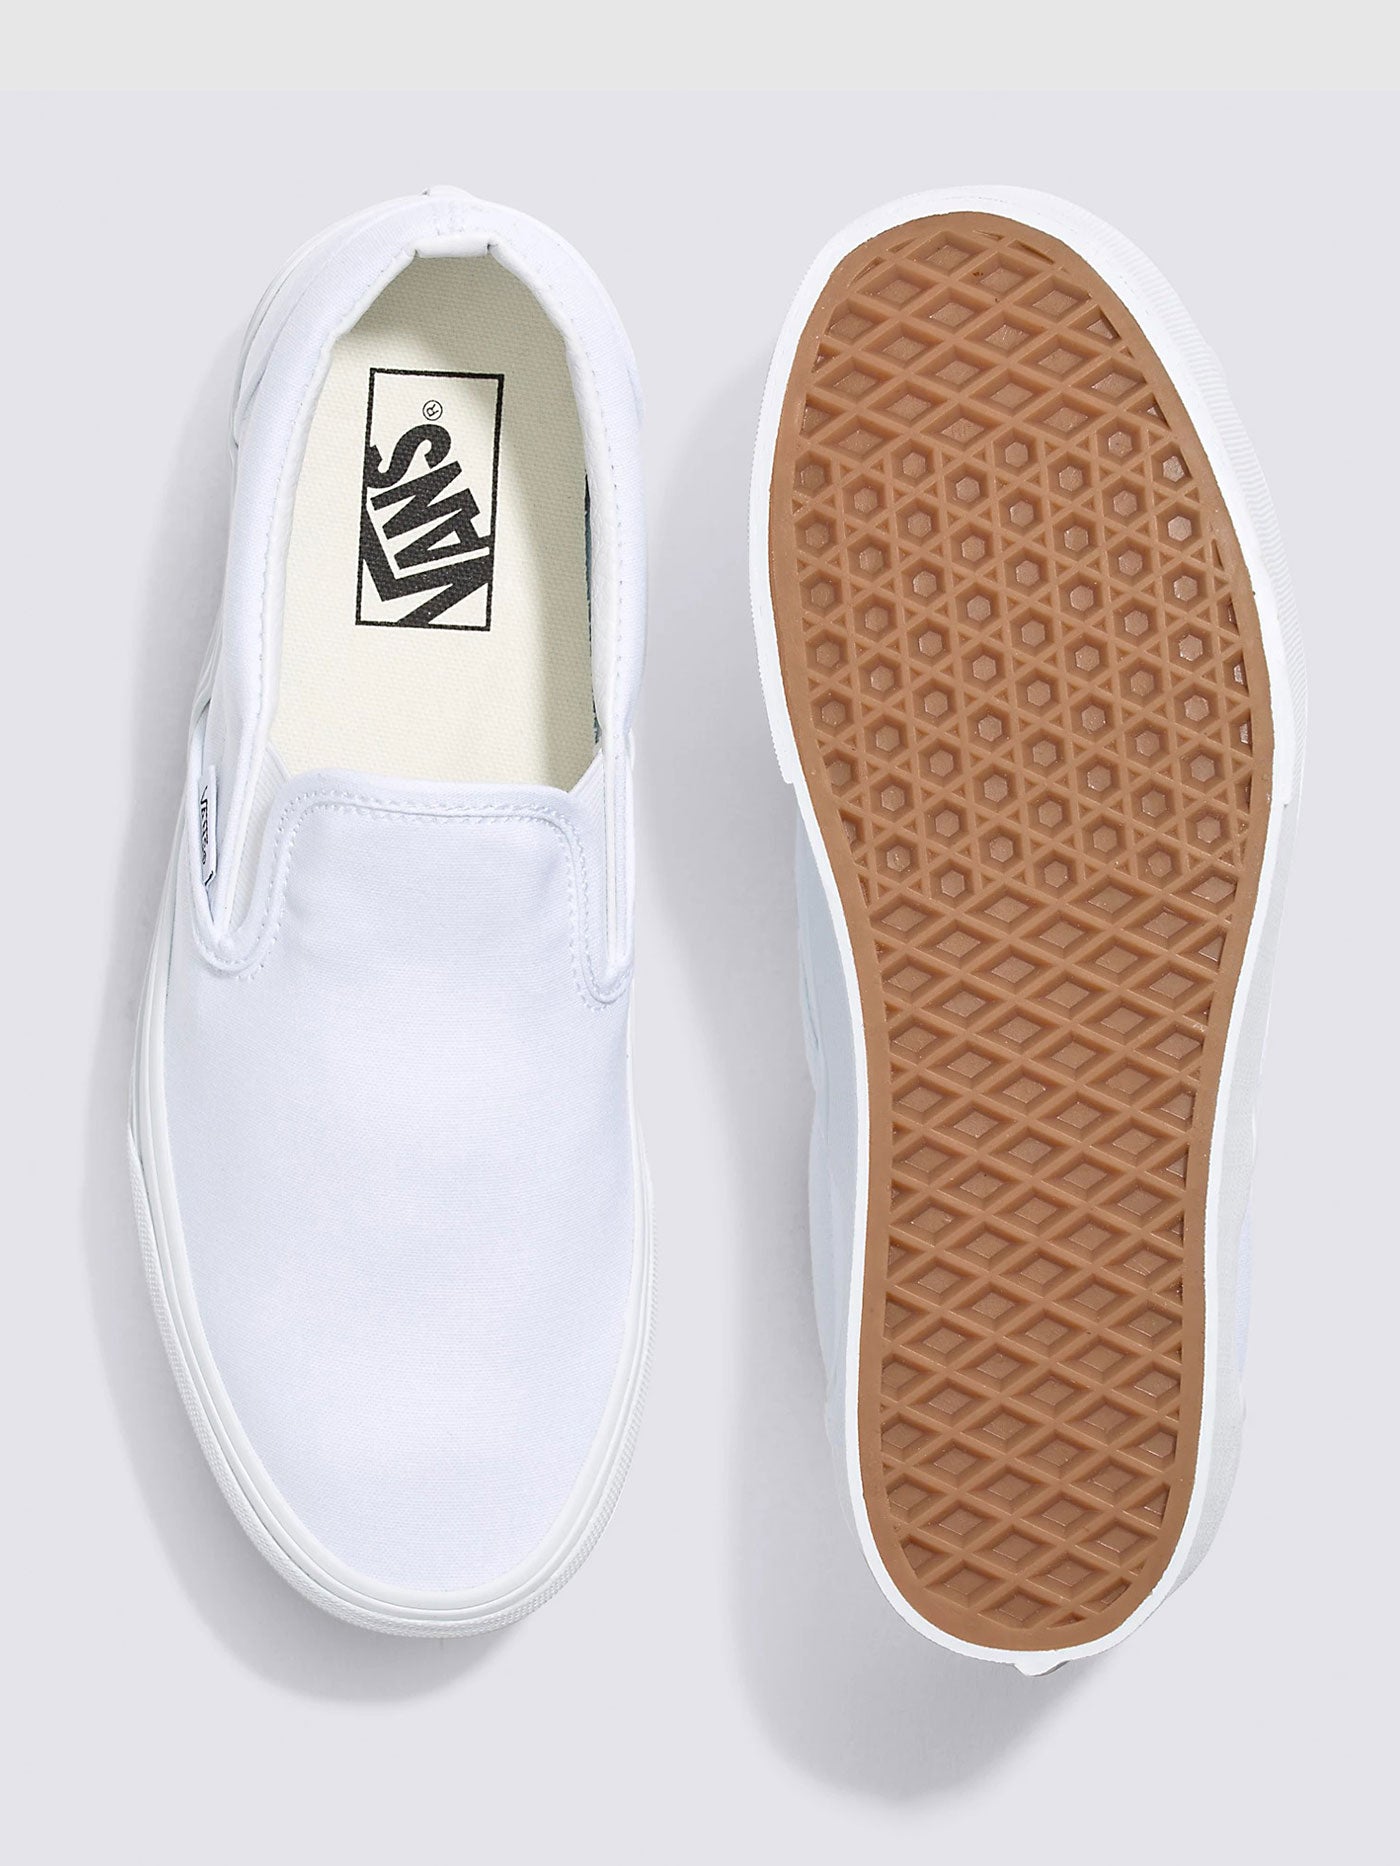 Vans Classic Slip-on Stackform Canvas White Shoes Spring 2024